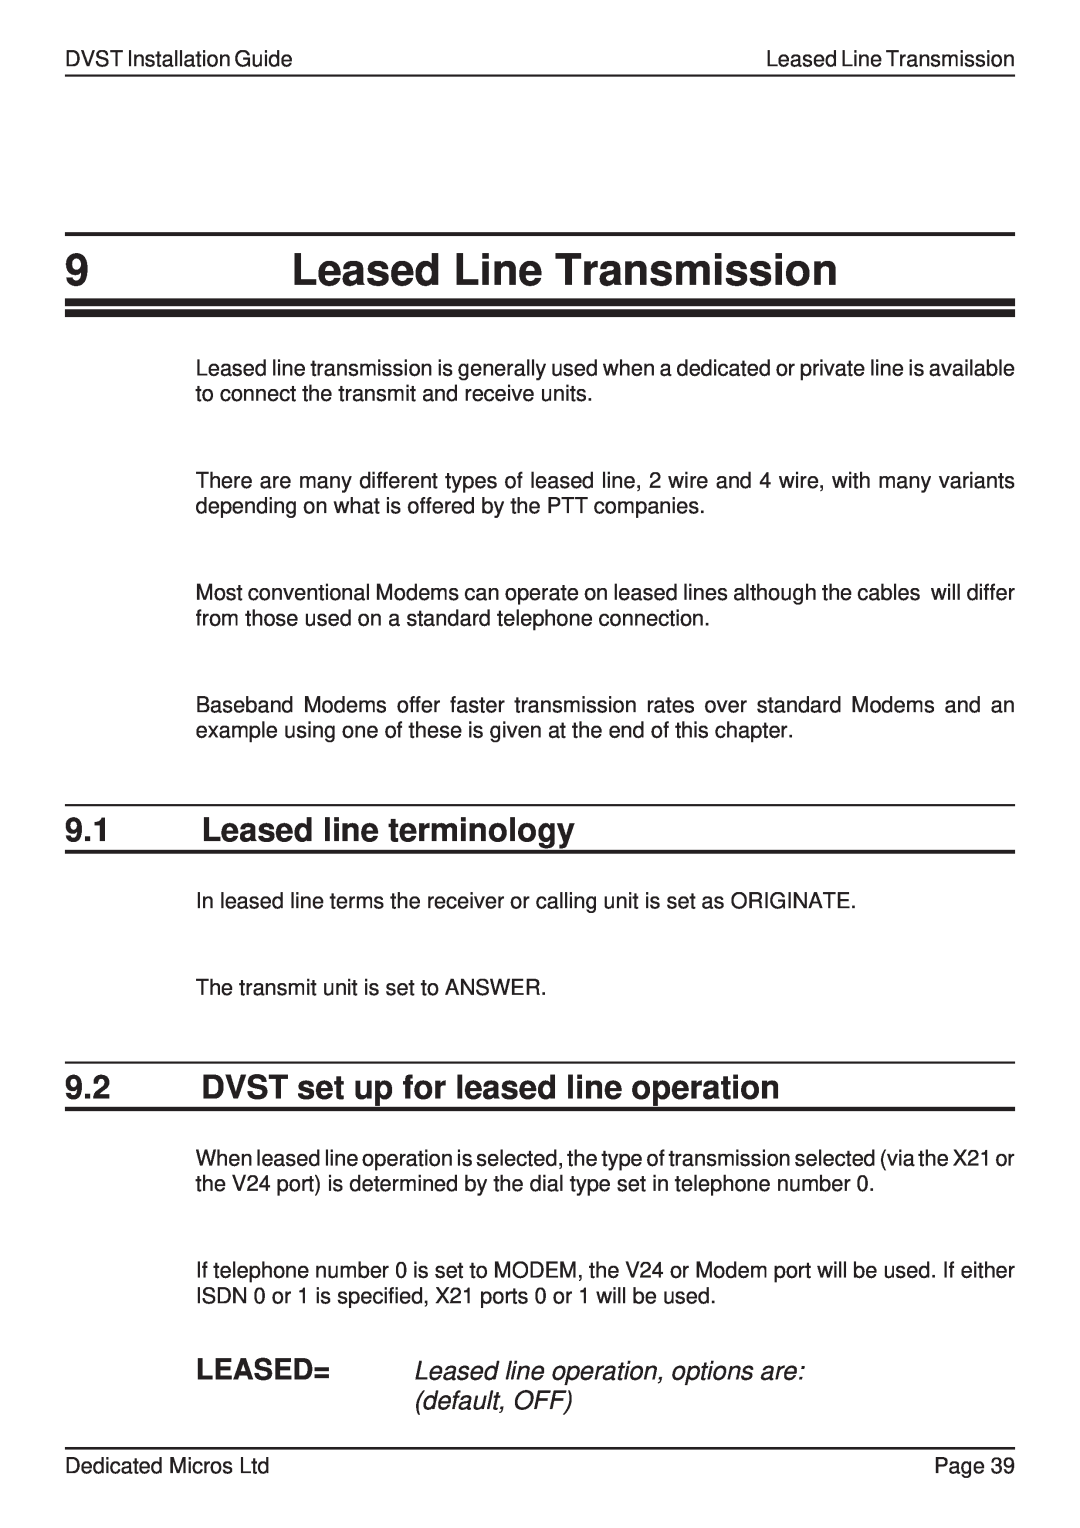 Guardian Technologies DFT 150/175, DVST manual Leased Line Transmission, 9.1Leased line terminology 